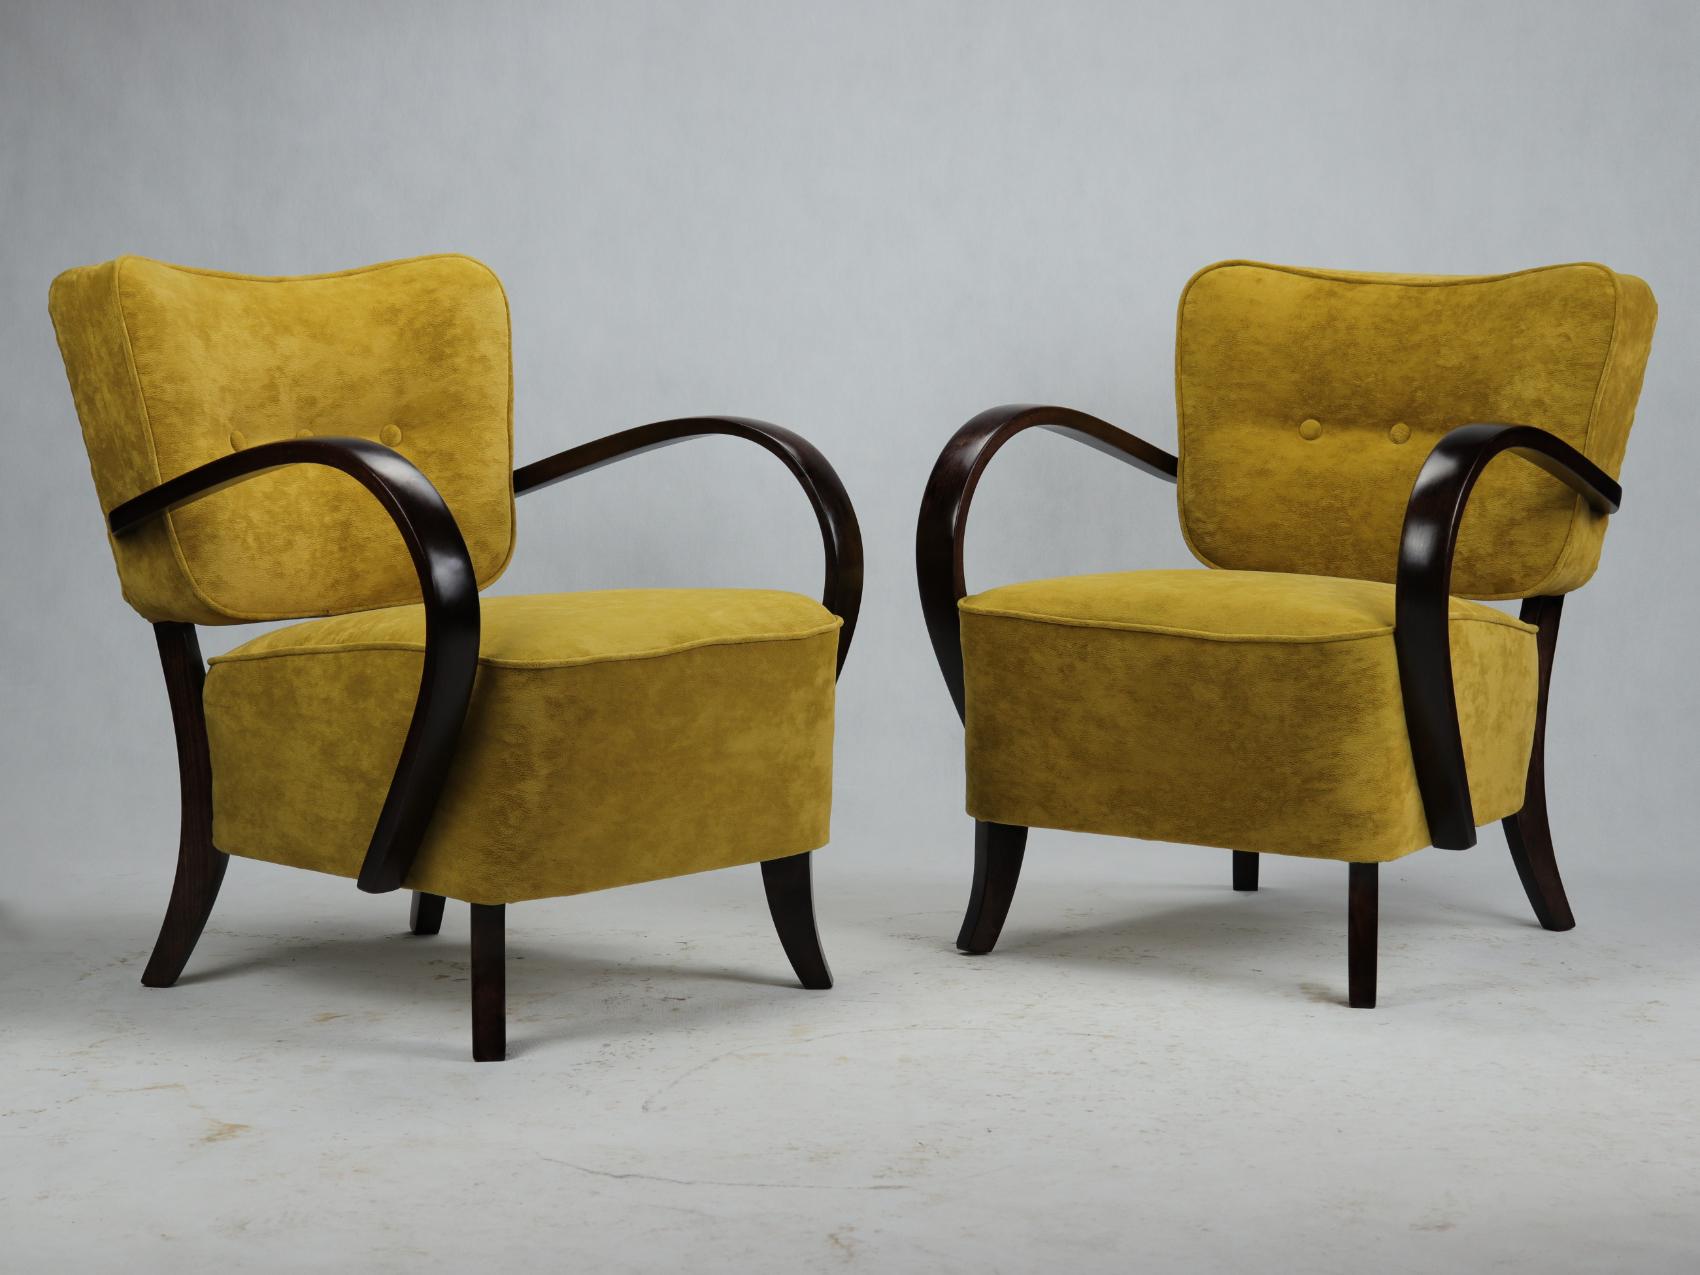 These armchairs, model H 237 were designed by Jindřich Halabala and produced in Czechoslovakia in the 1930s by UP Zavody Brno.
The chairs are completely restored, have new upholstery and the wood finish in French polish.